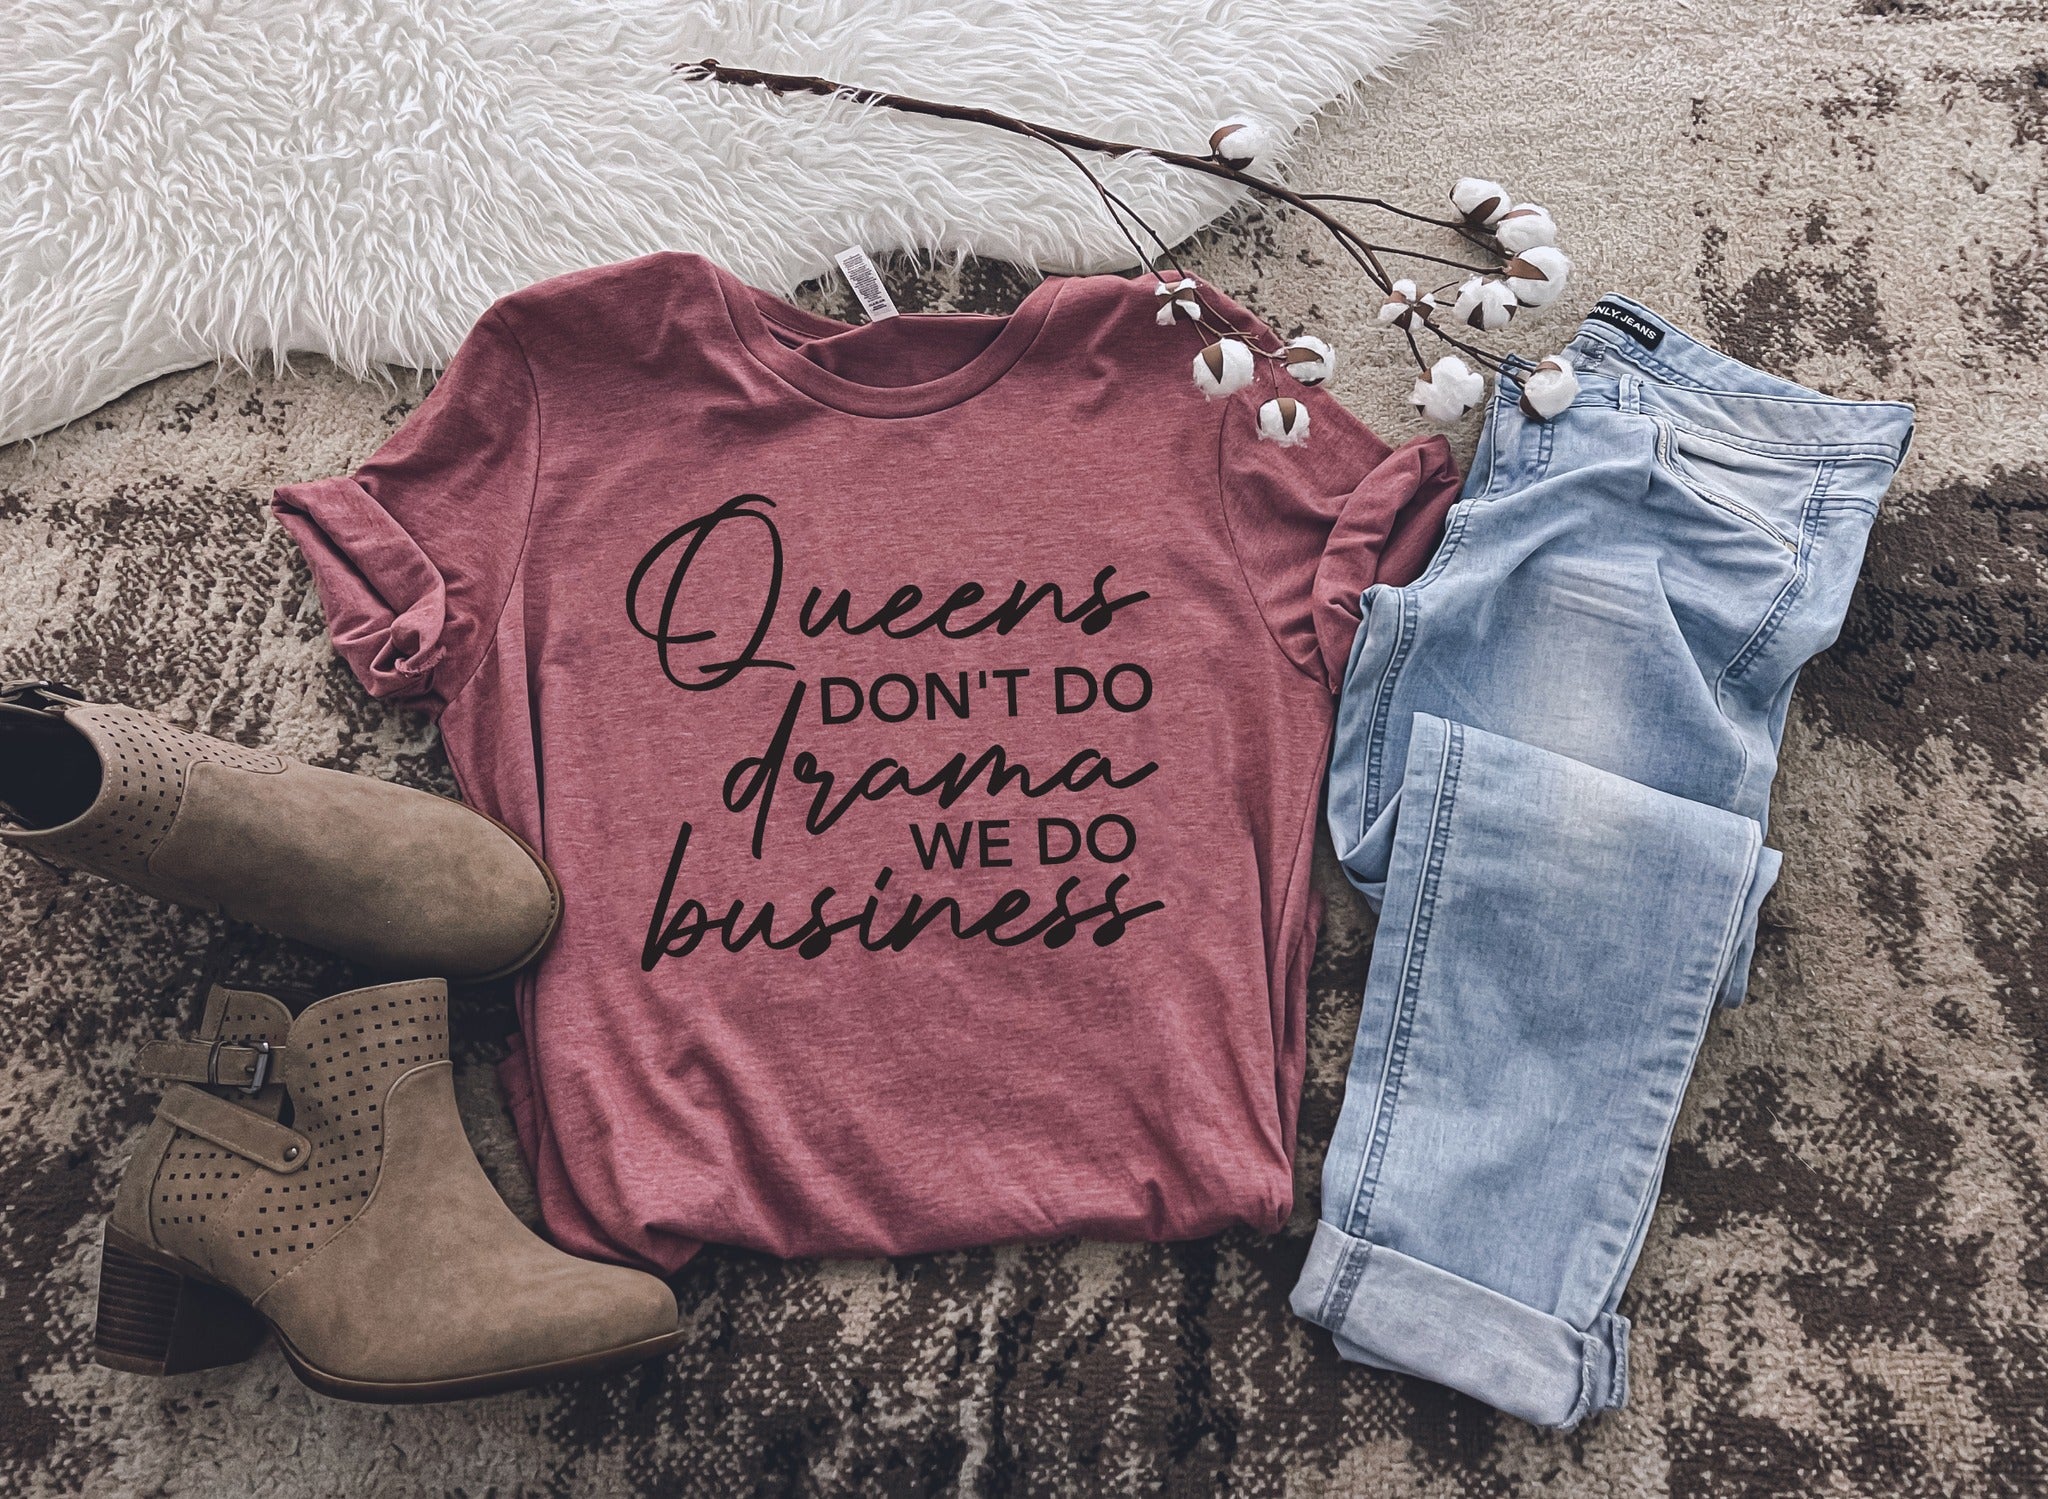 QUEENS DONT DO DRAMA WE DO BUSINESS GRAPHIC TEE